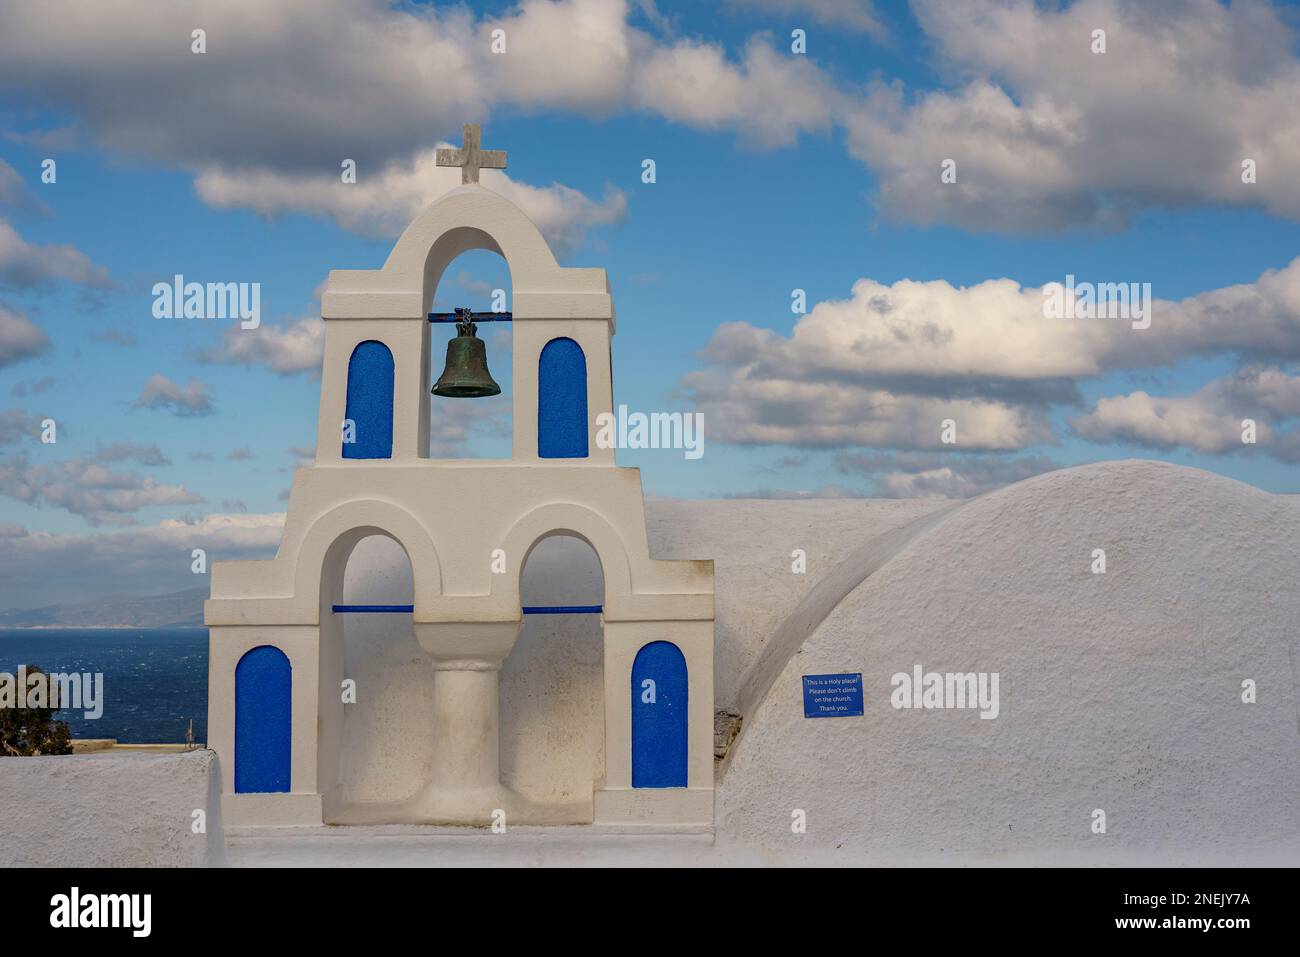 Characteristic whitewashed bell tower in Oia village, Santorini Stock Photo